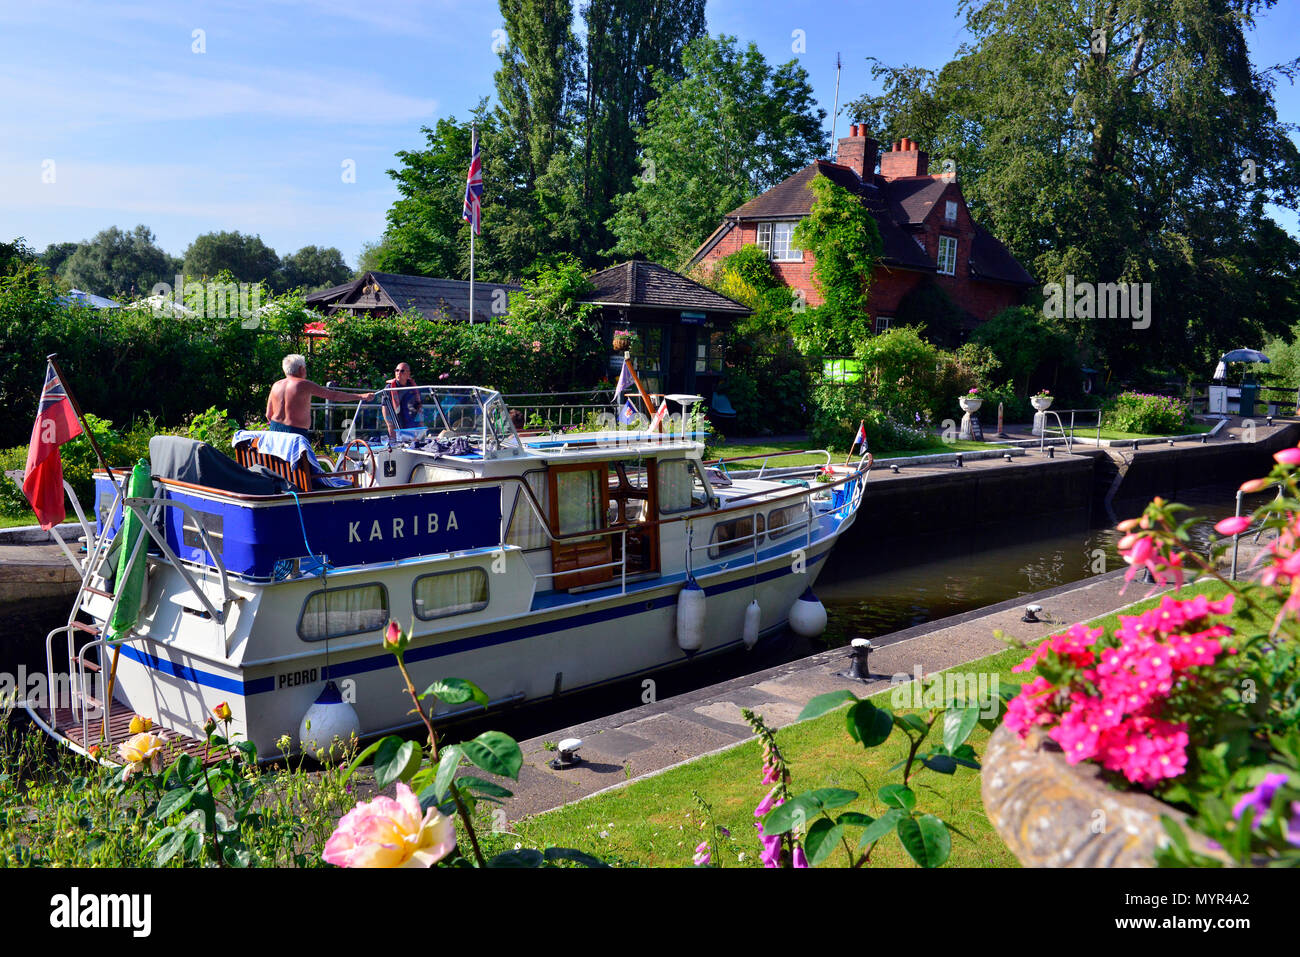 Private pleasure boat entering the Sonning Lock on the River Thames in the village of Sonning,Reading, Berkshire,on a beauiful sunny summers afternoon Stock Photo